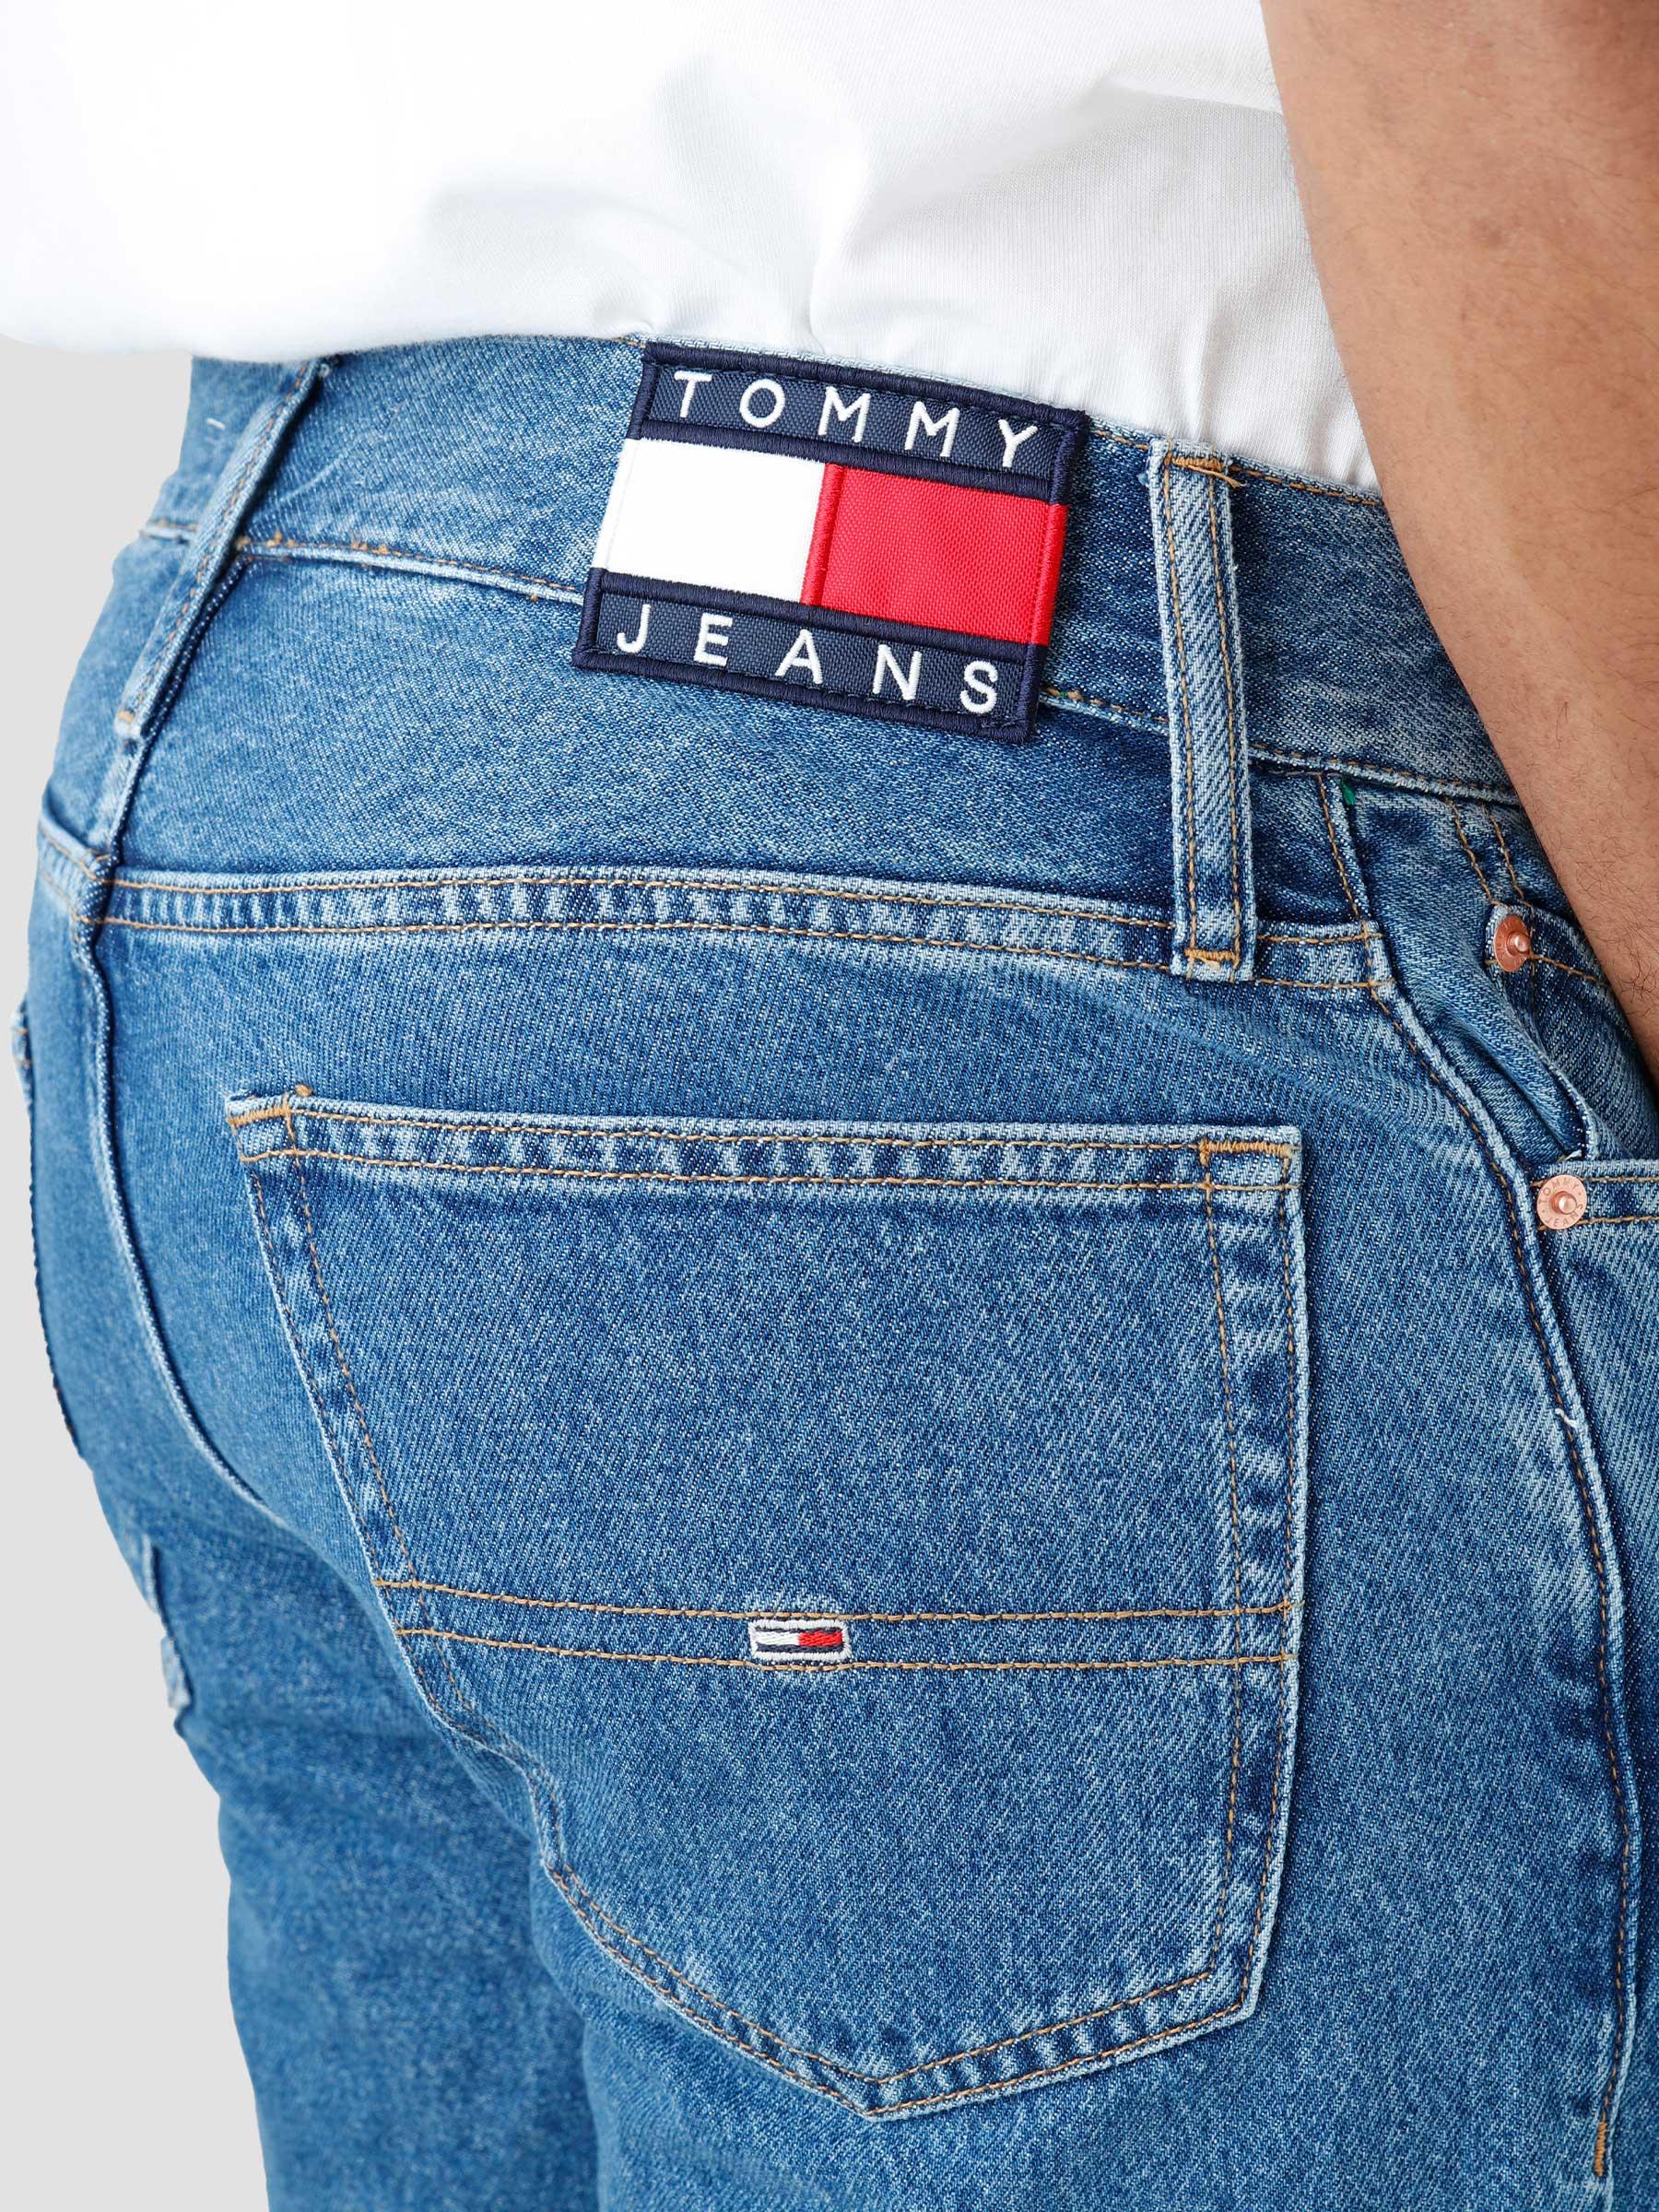 Tommy Jeans Ethan Relaxed Tapered DF7032 Denim Medium - Freshcotton